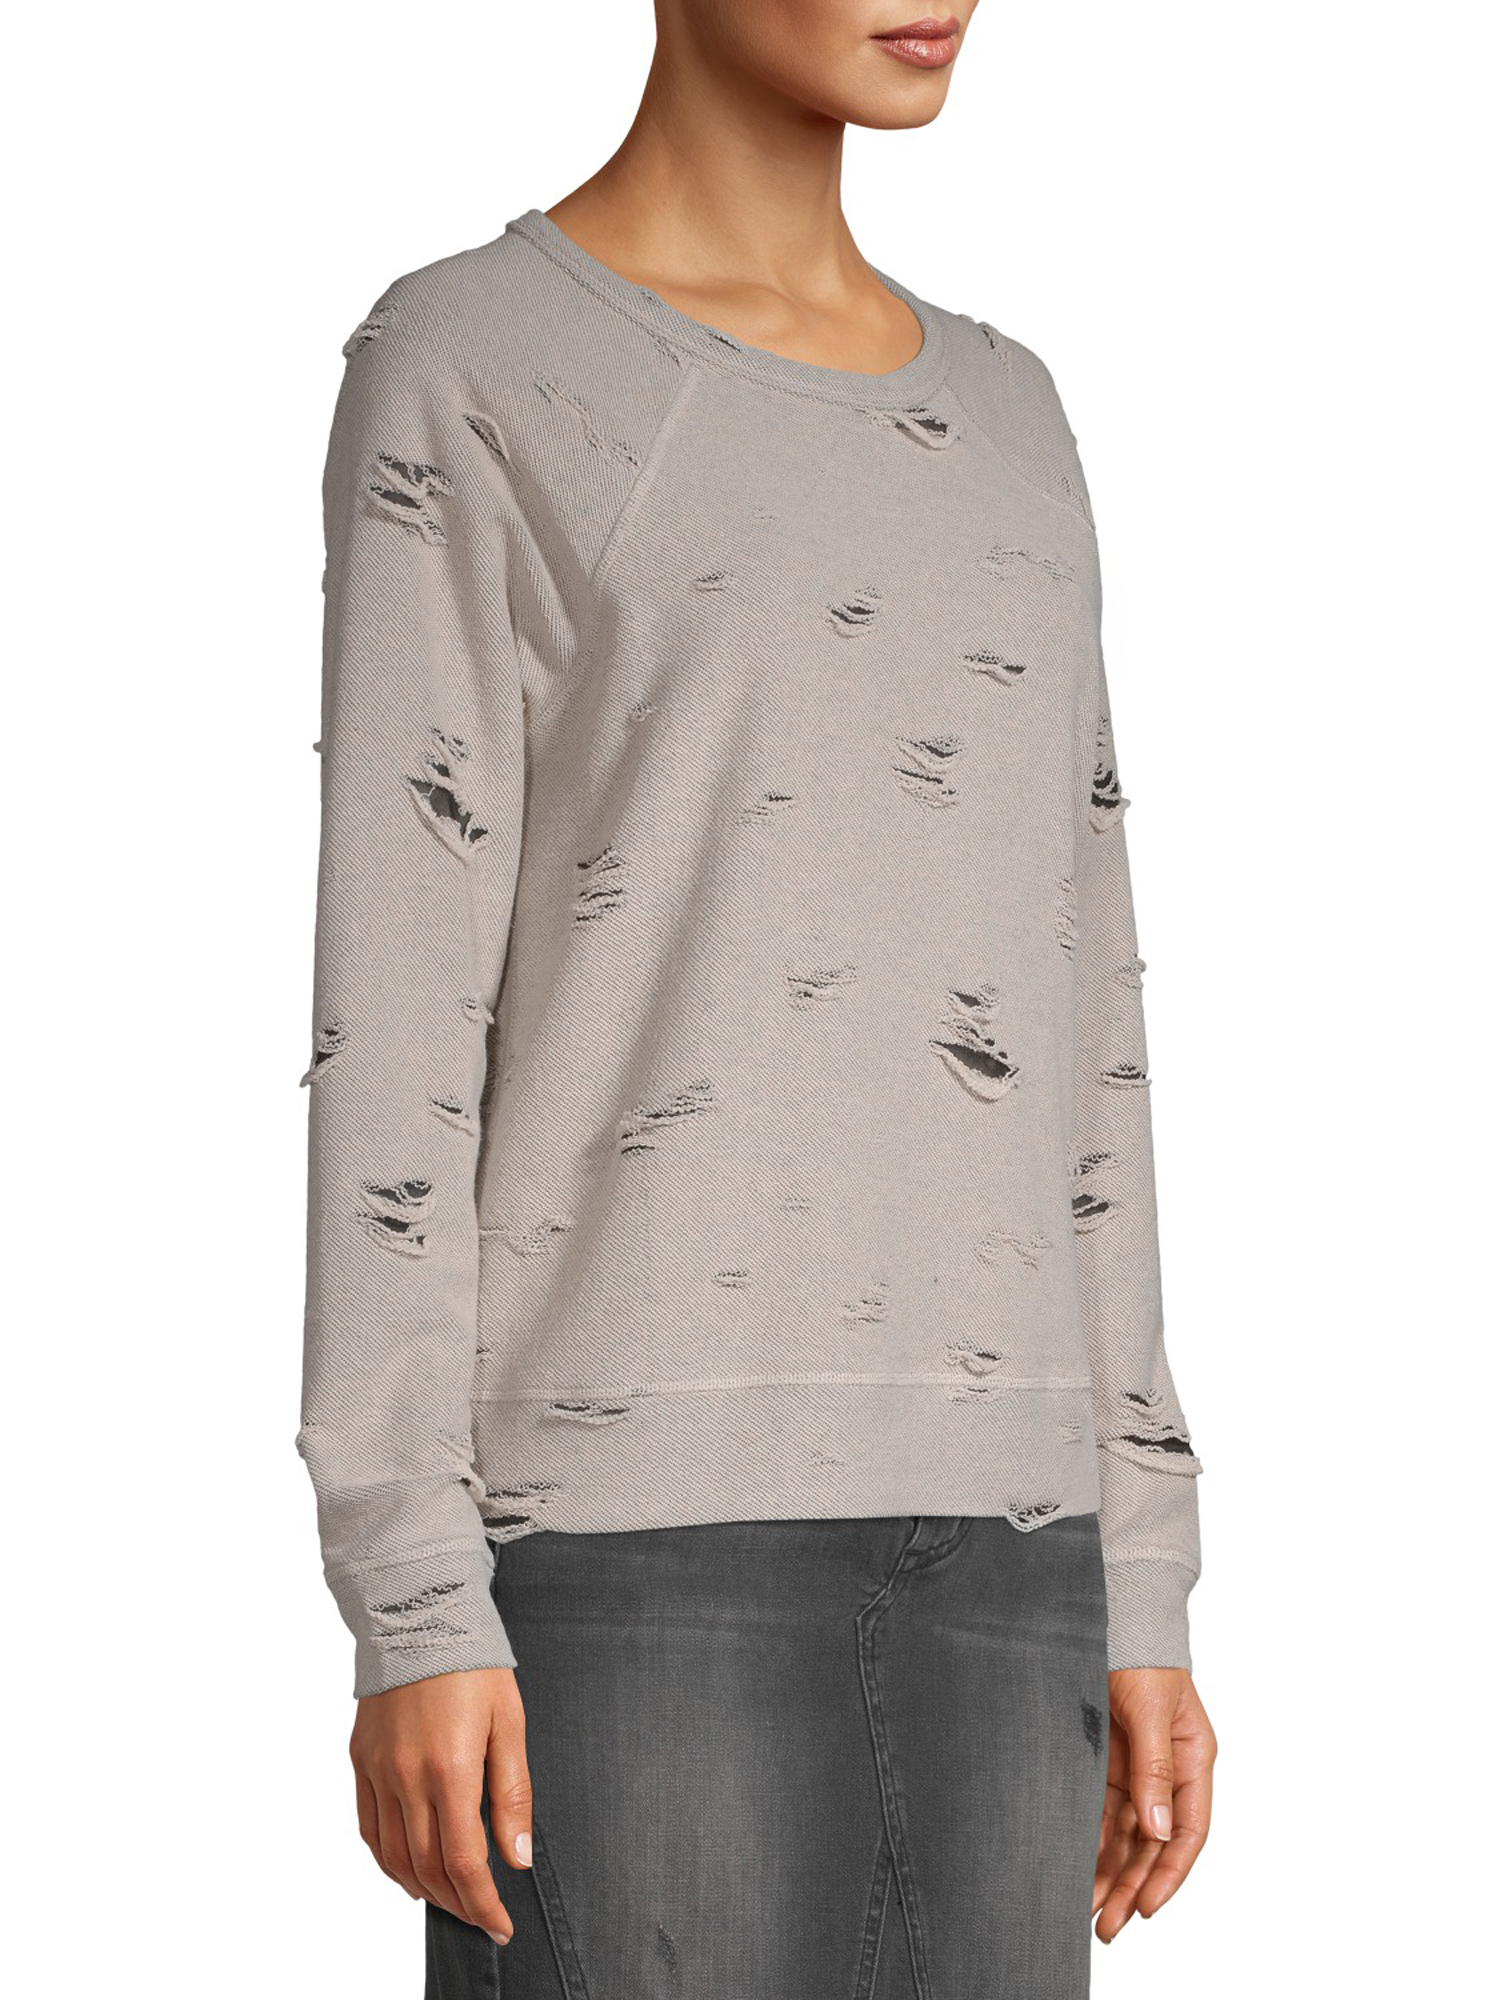 Scoop French Terry Distressed Sweatshirt Women's M - image 4 of 7